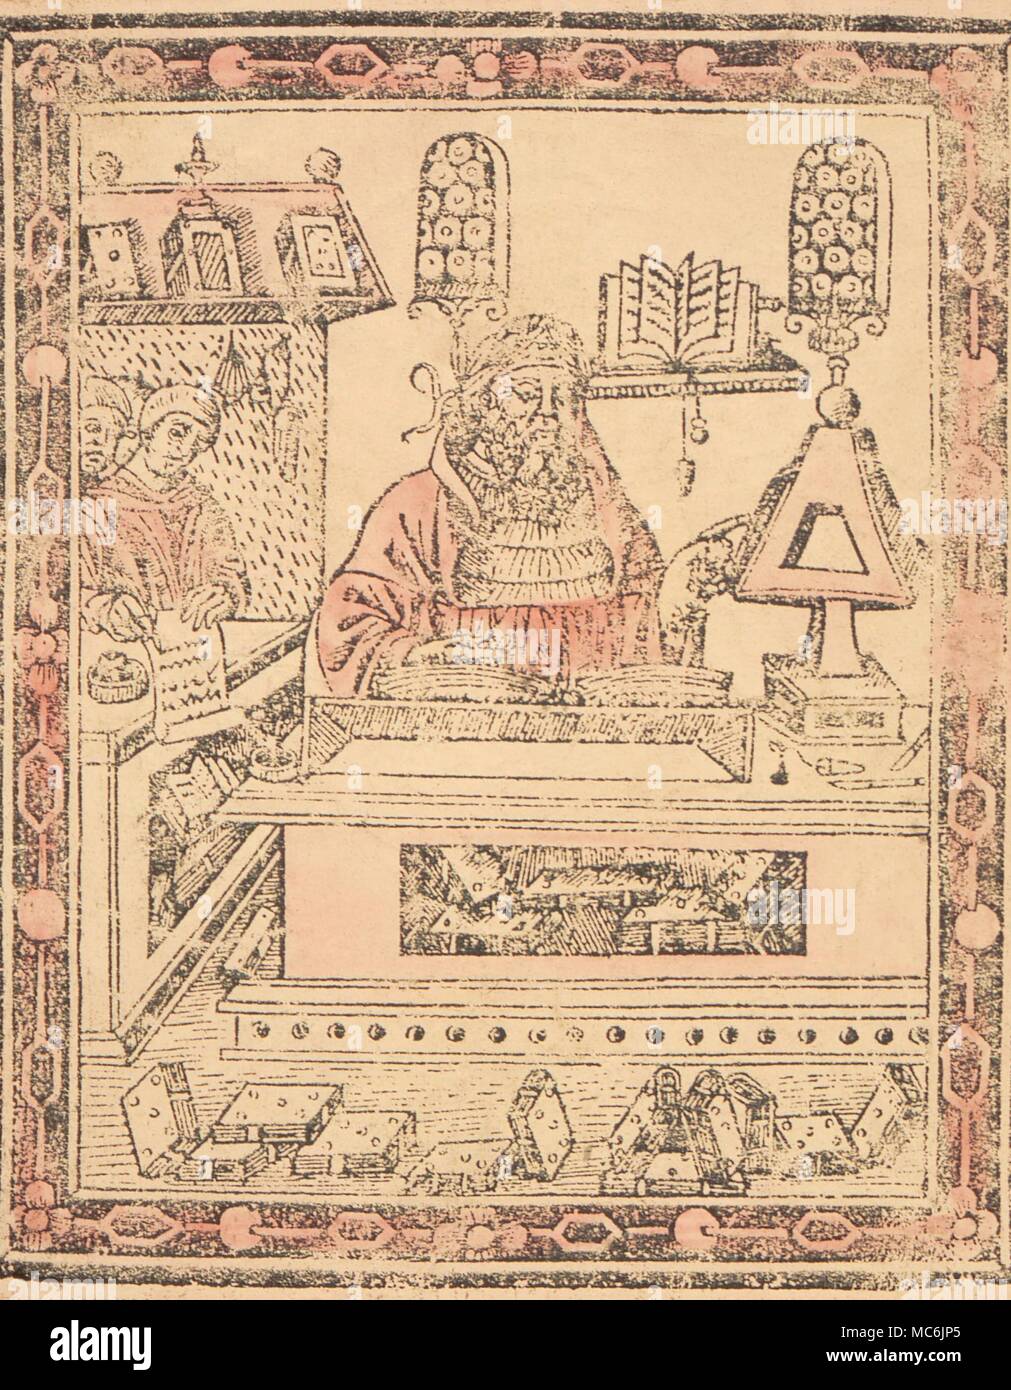 OCCULTISTS - Woodcut print (hand-coloured) portrait of Albertus Magnus, from a copy of the 'Petit Albert' grimoire. Private collection Stock Photo